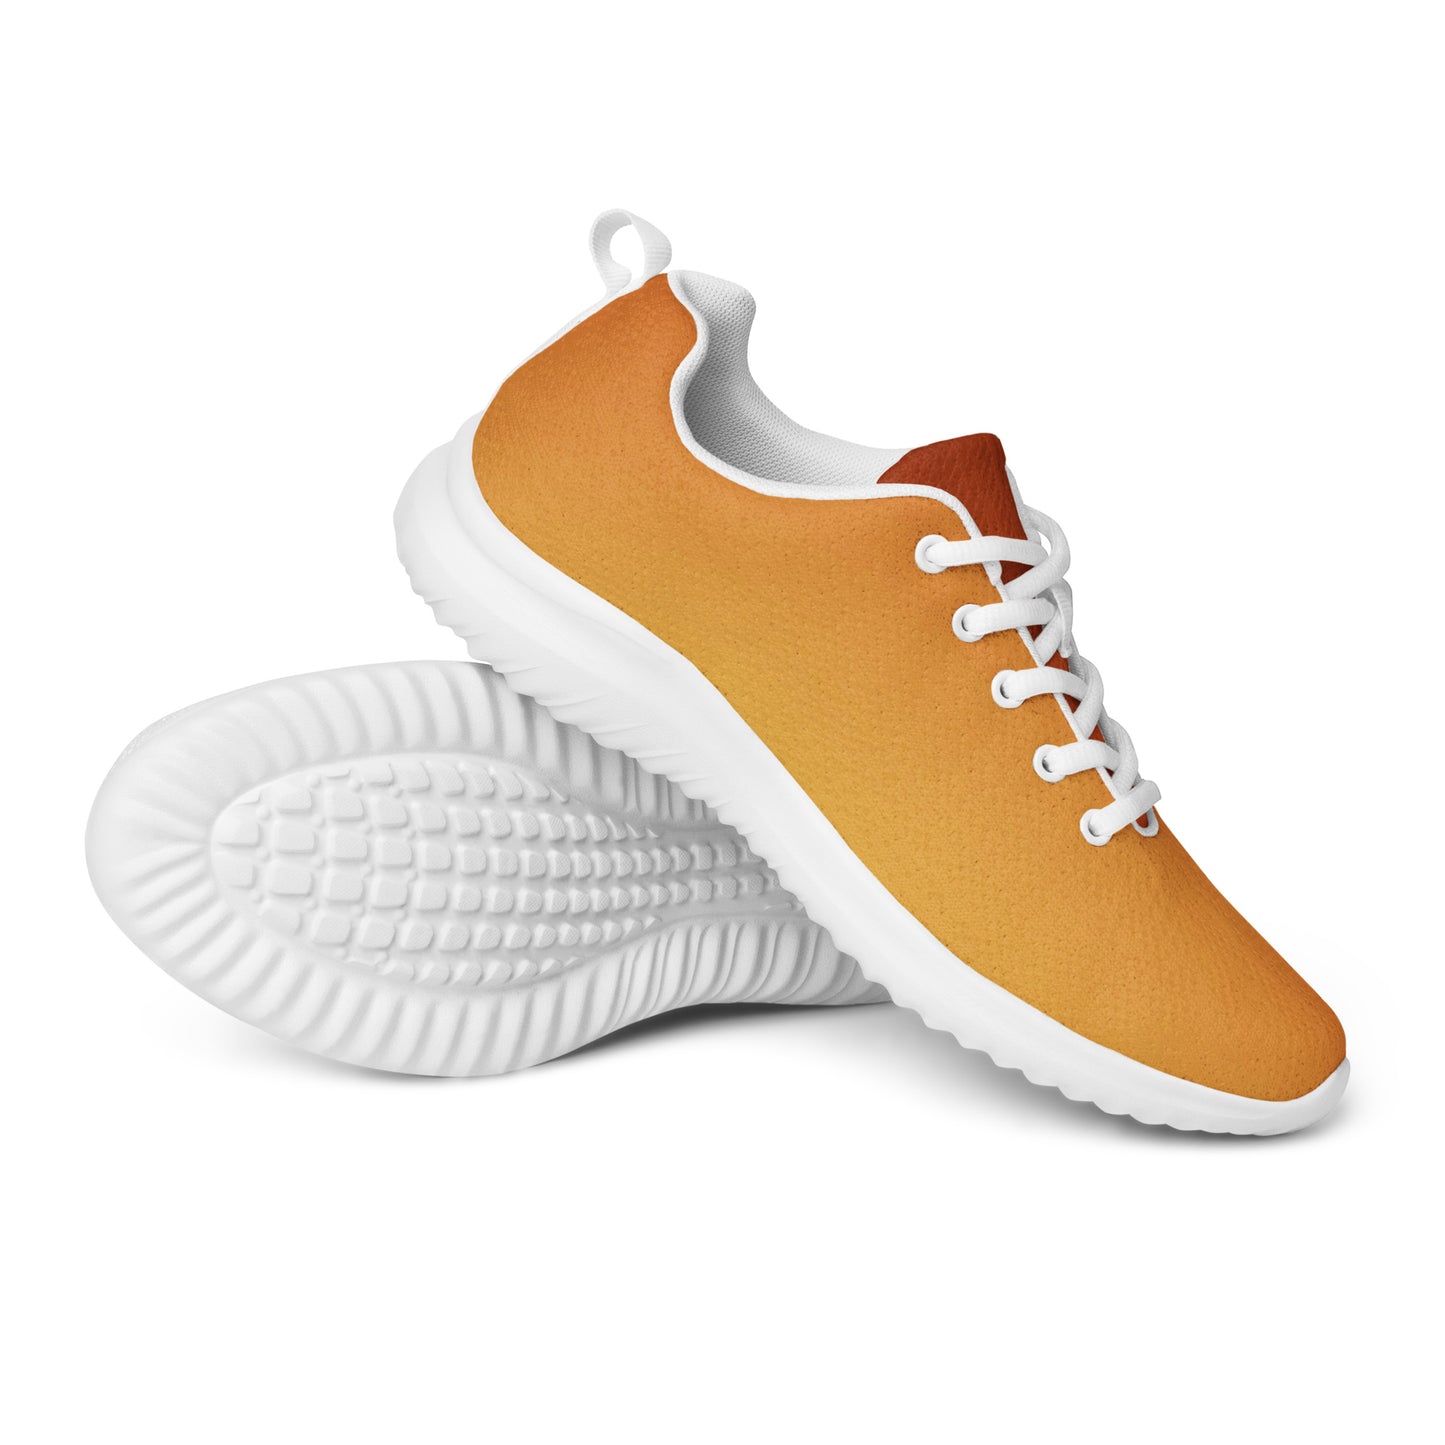 DASH Sunset Women’s Athletic Shoes Lightweight Breathable Design by IOBI Original Apparel